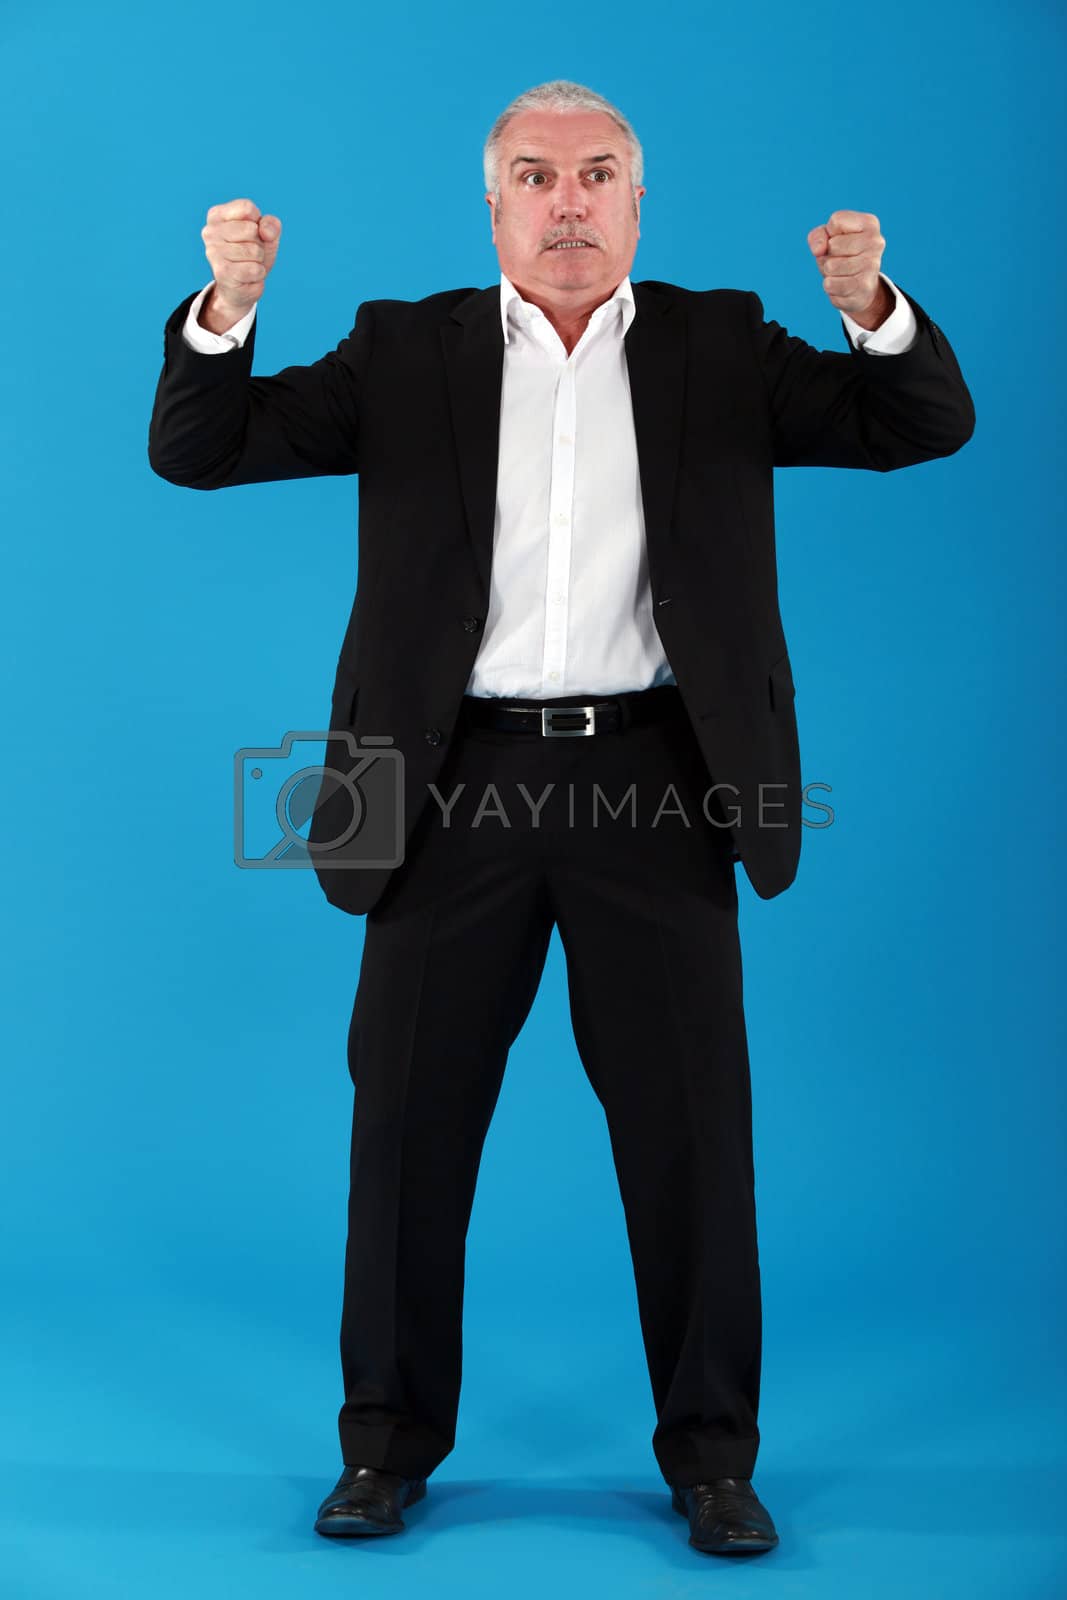 Royalty free image of Angry Senior man by phovoir